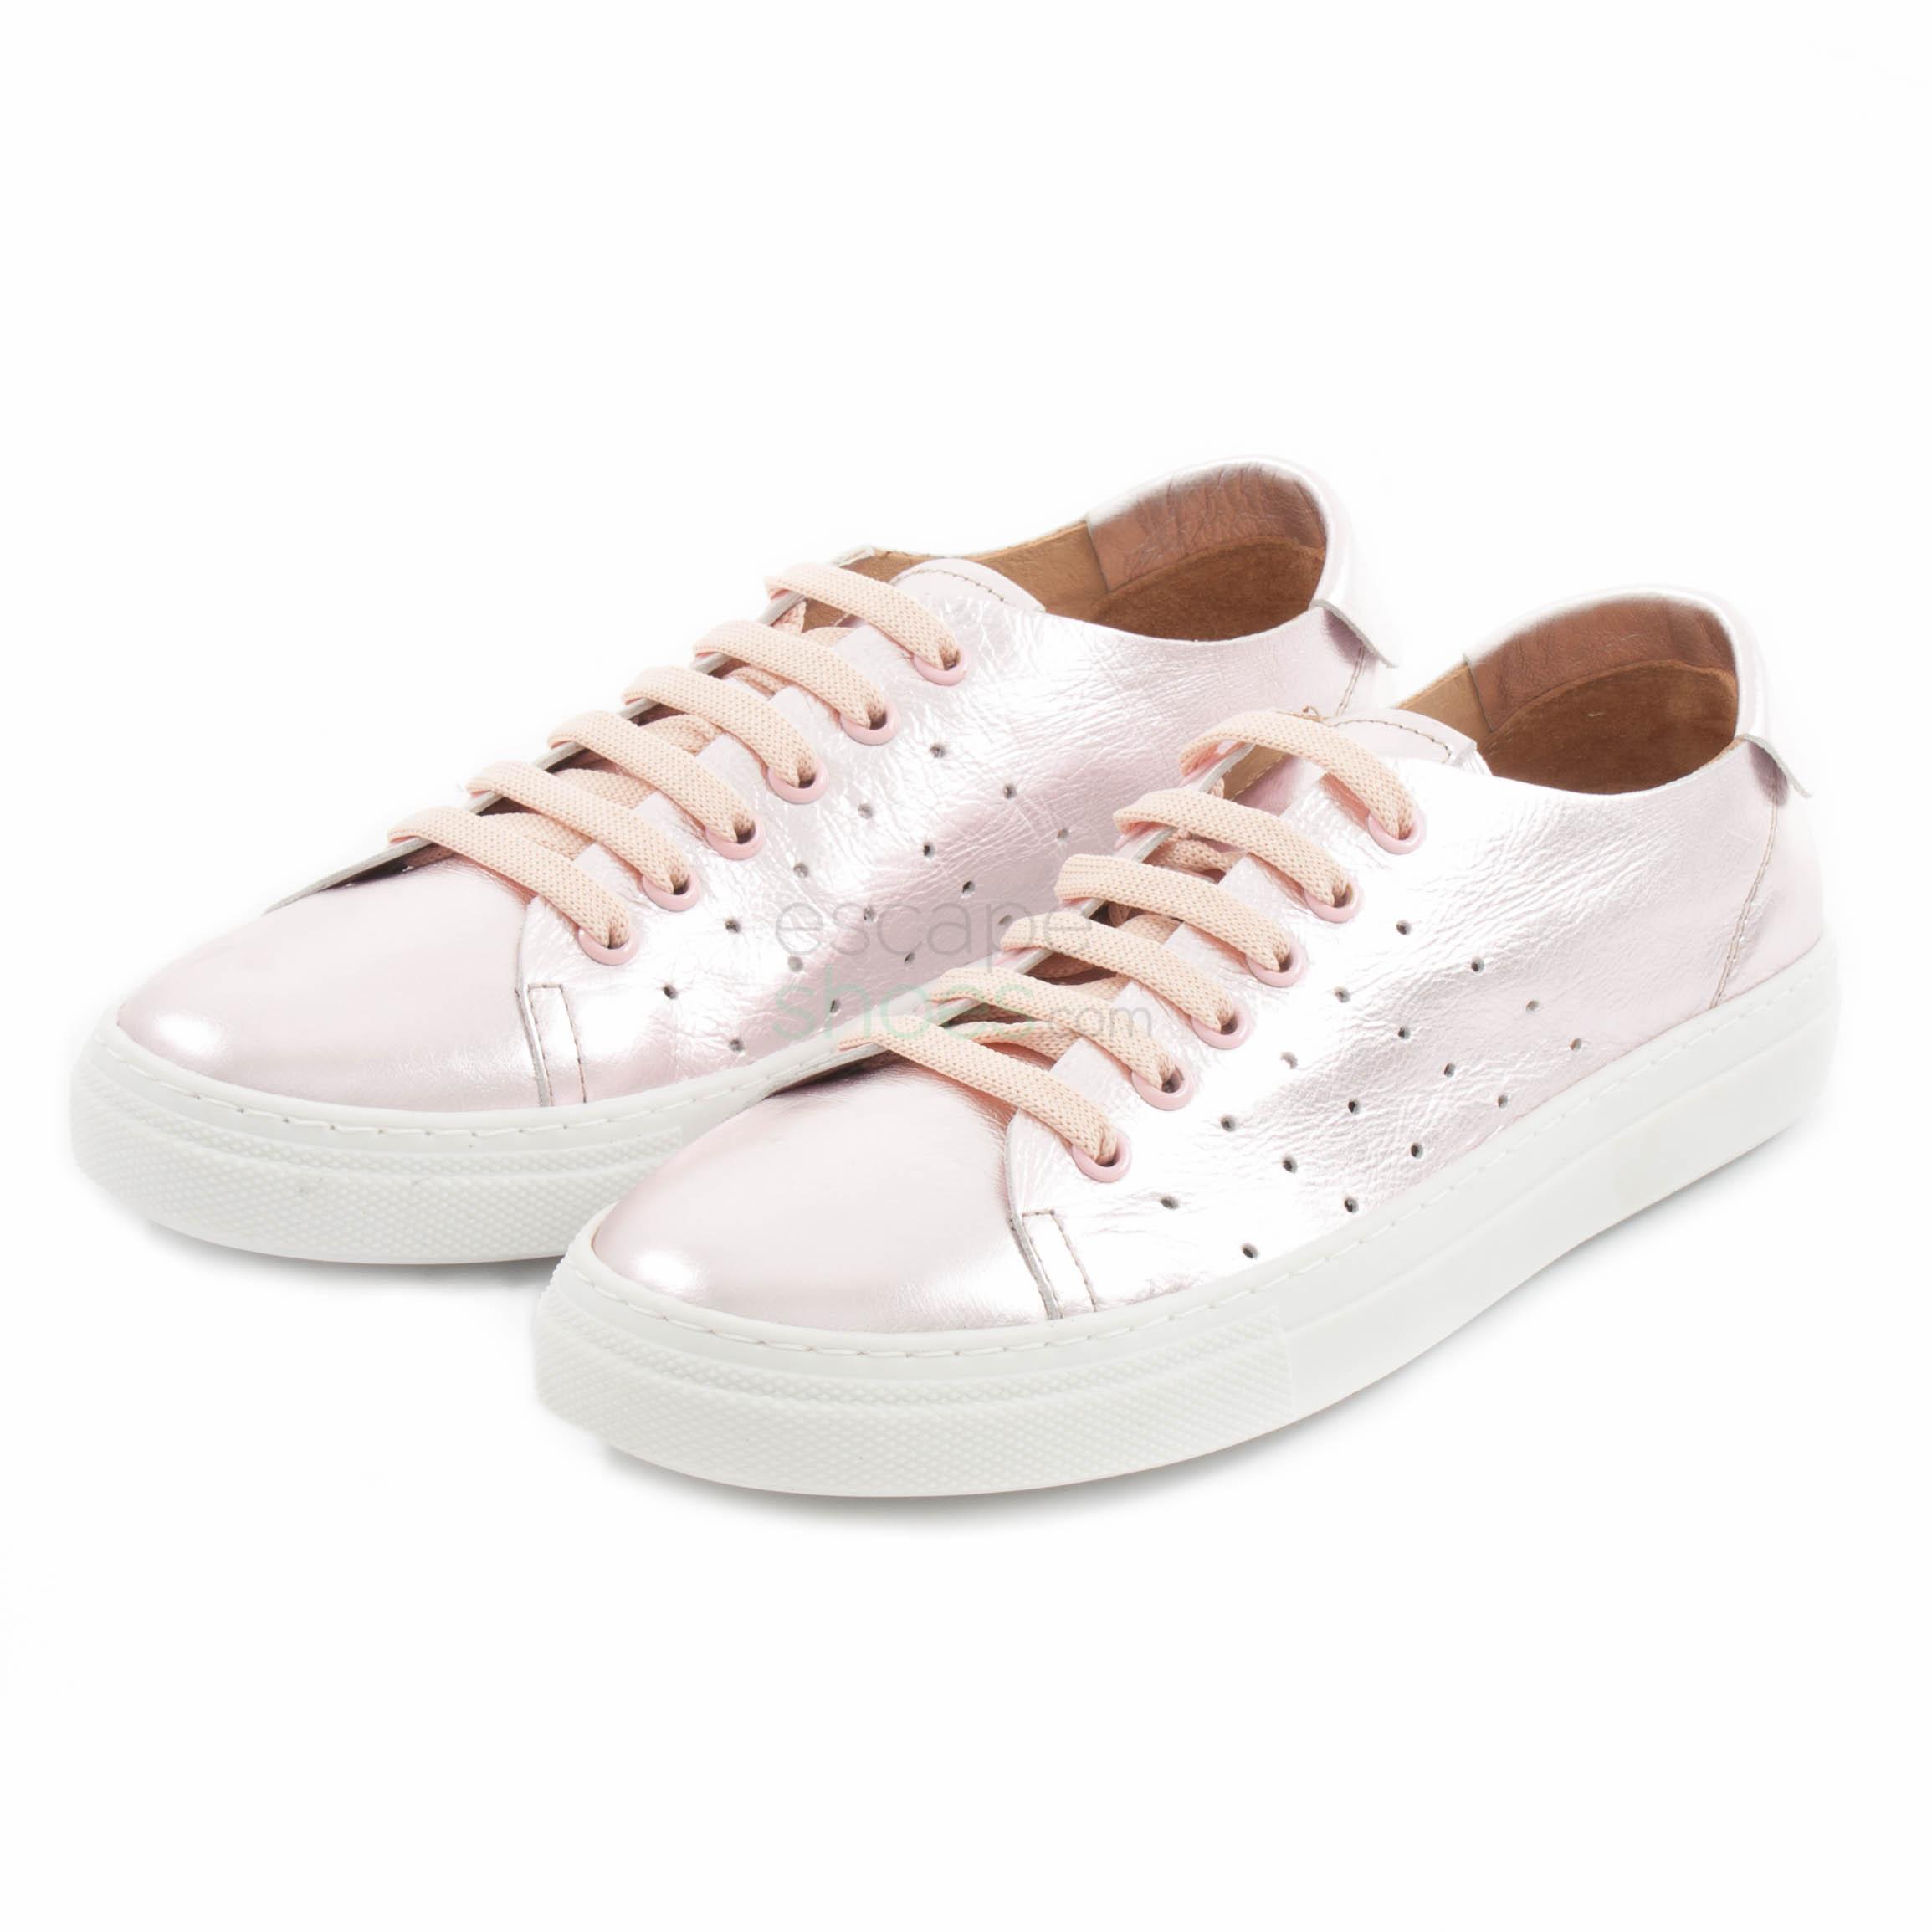 pink and gold sneakers